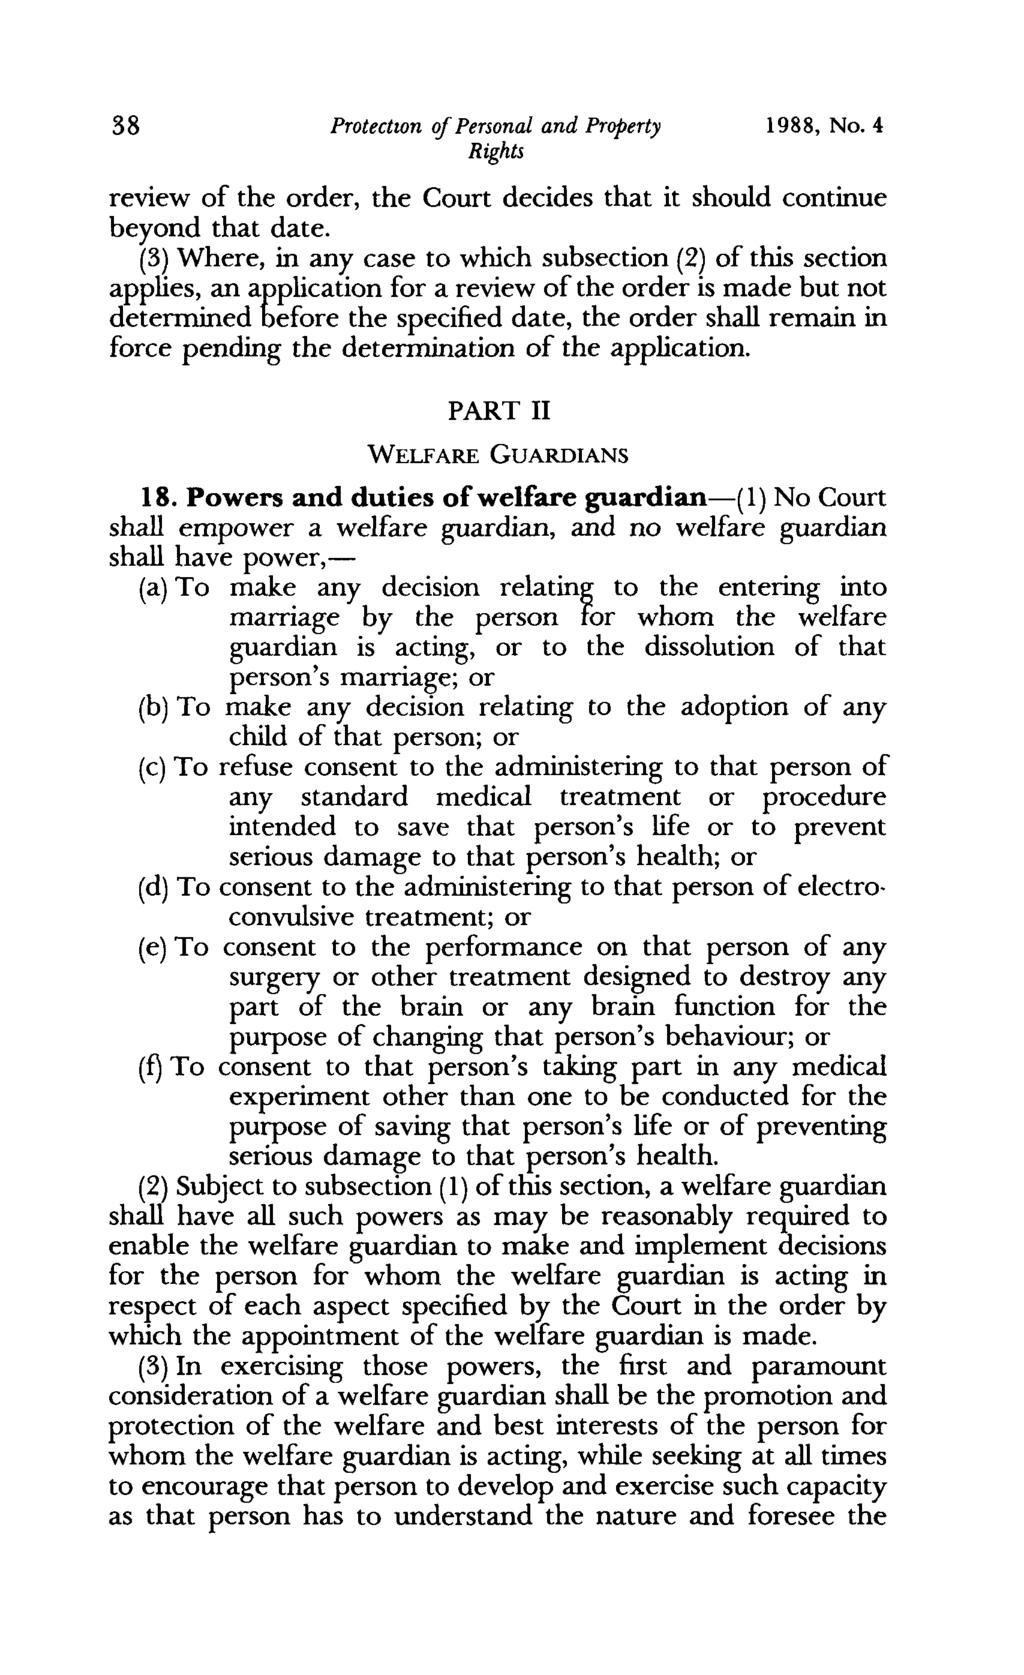 38 Protectwn of Personal and Property 1988, No. 4 review of the order, the Court decides that it should continue beyond that date.